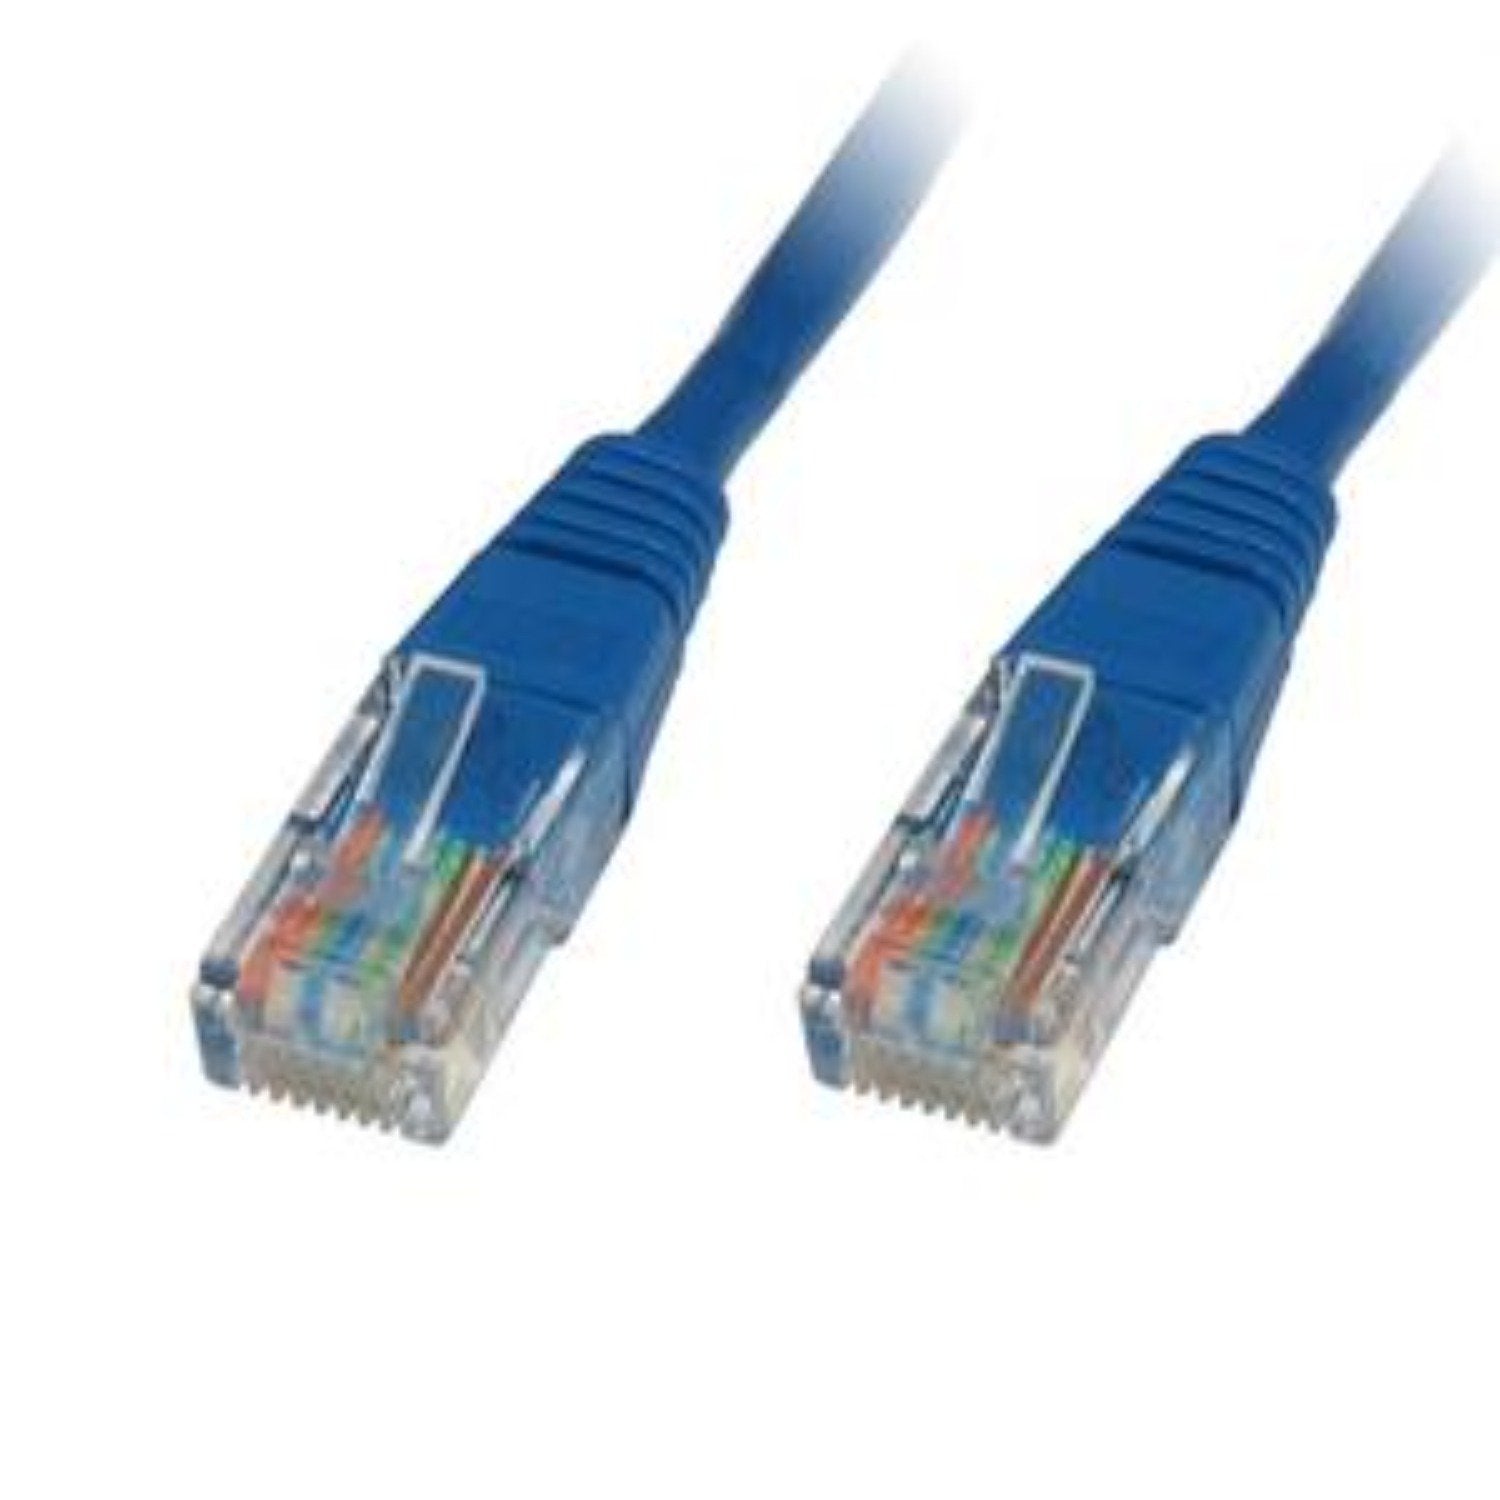 ethernet cable 10m cat6 in blue